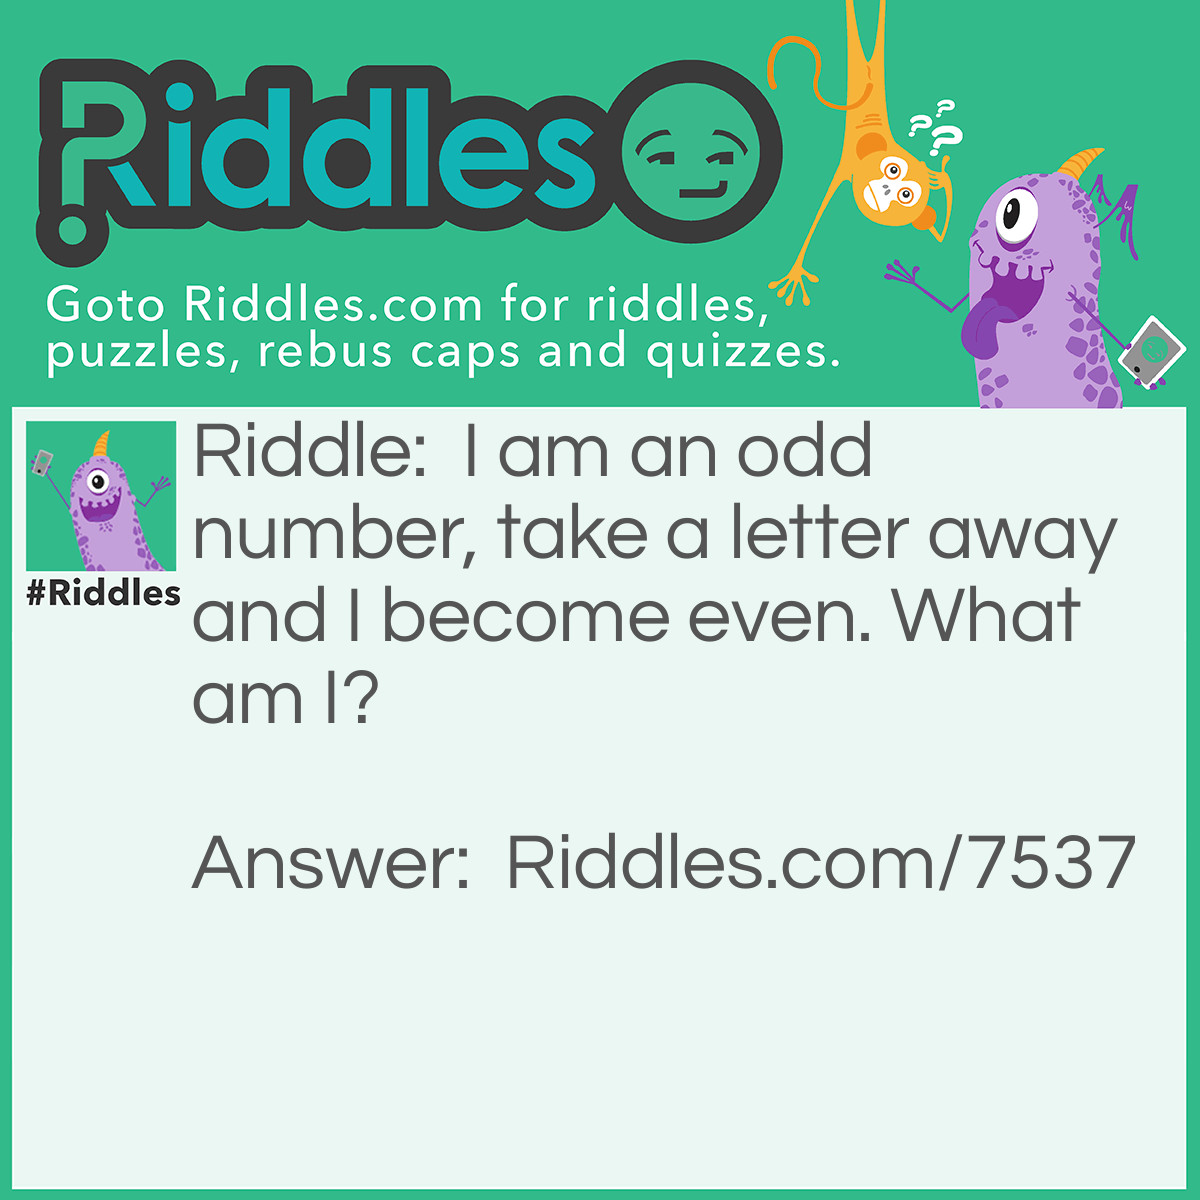 Riddle: I am an odd number, take a letter away and I become even. What am I? Answer: Seven.